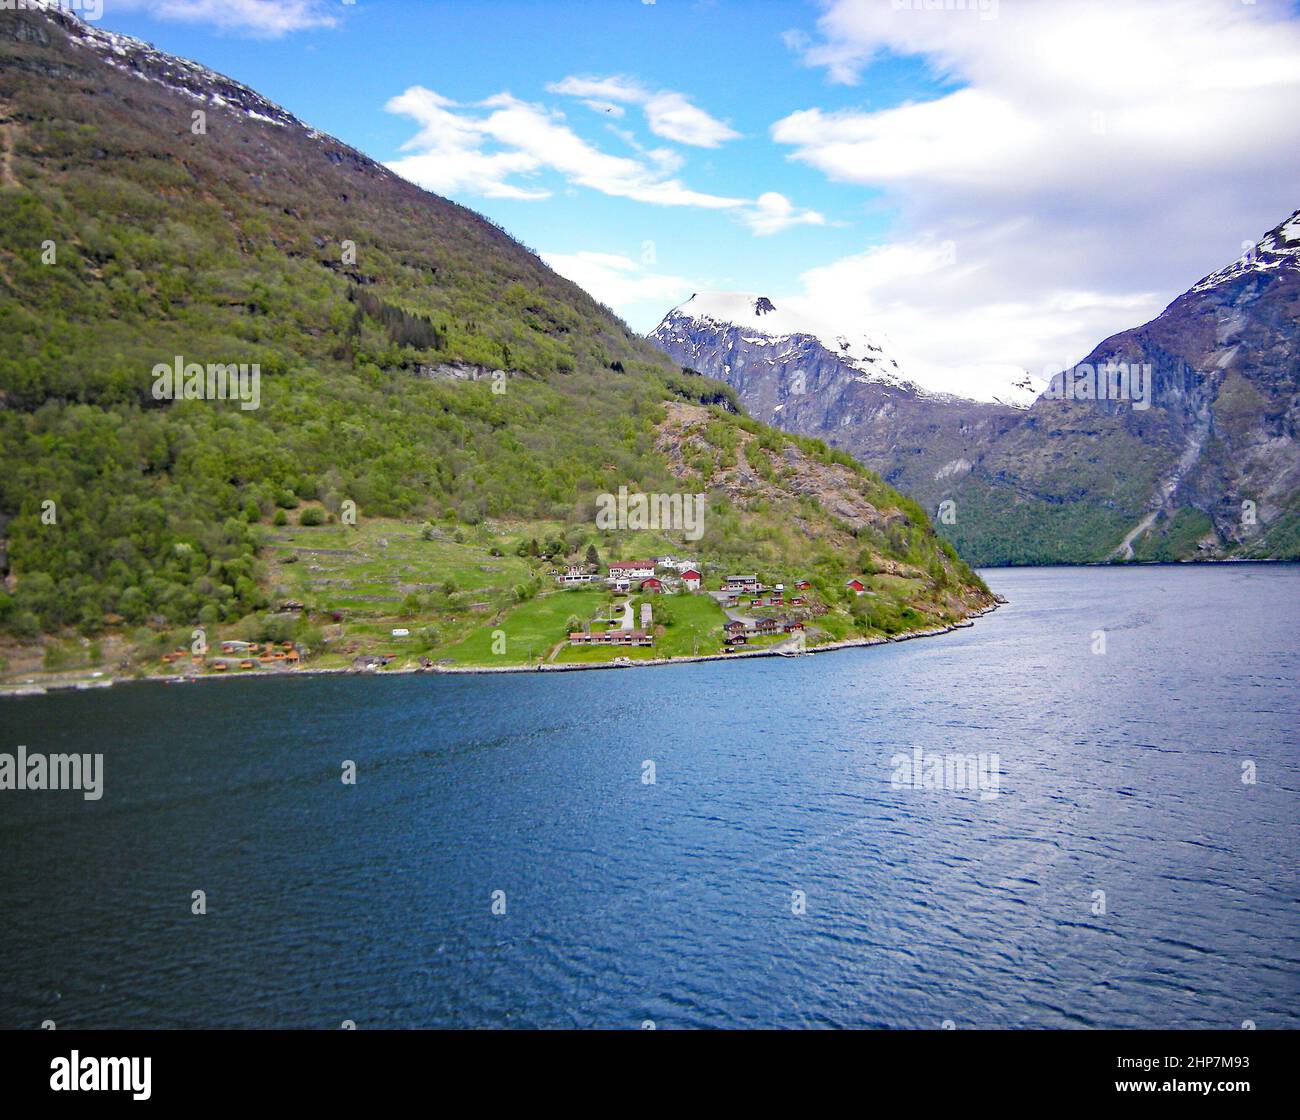 The little village perched on the steep fjord bank with the snow capped mountains behind Stock Photo